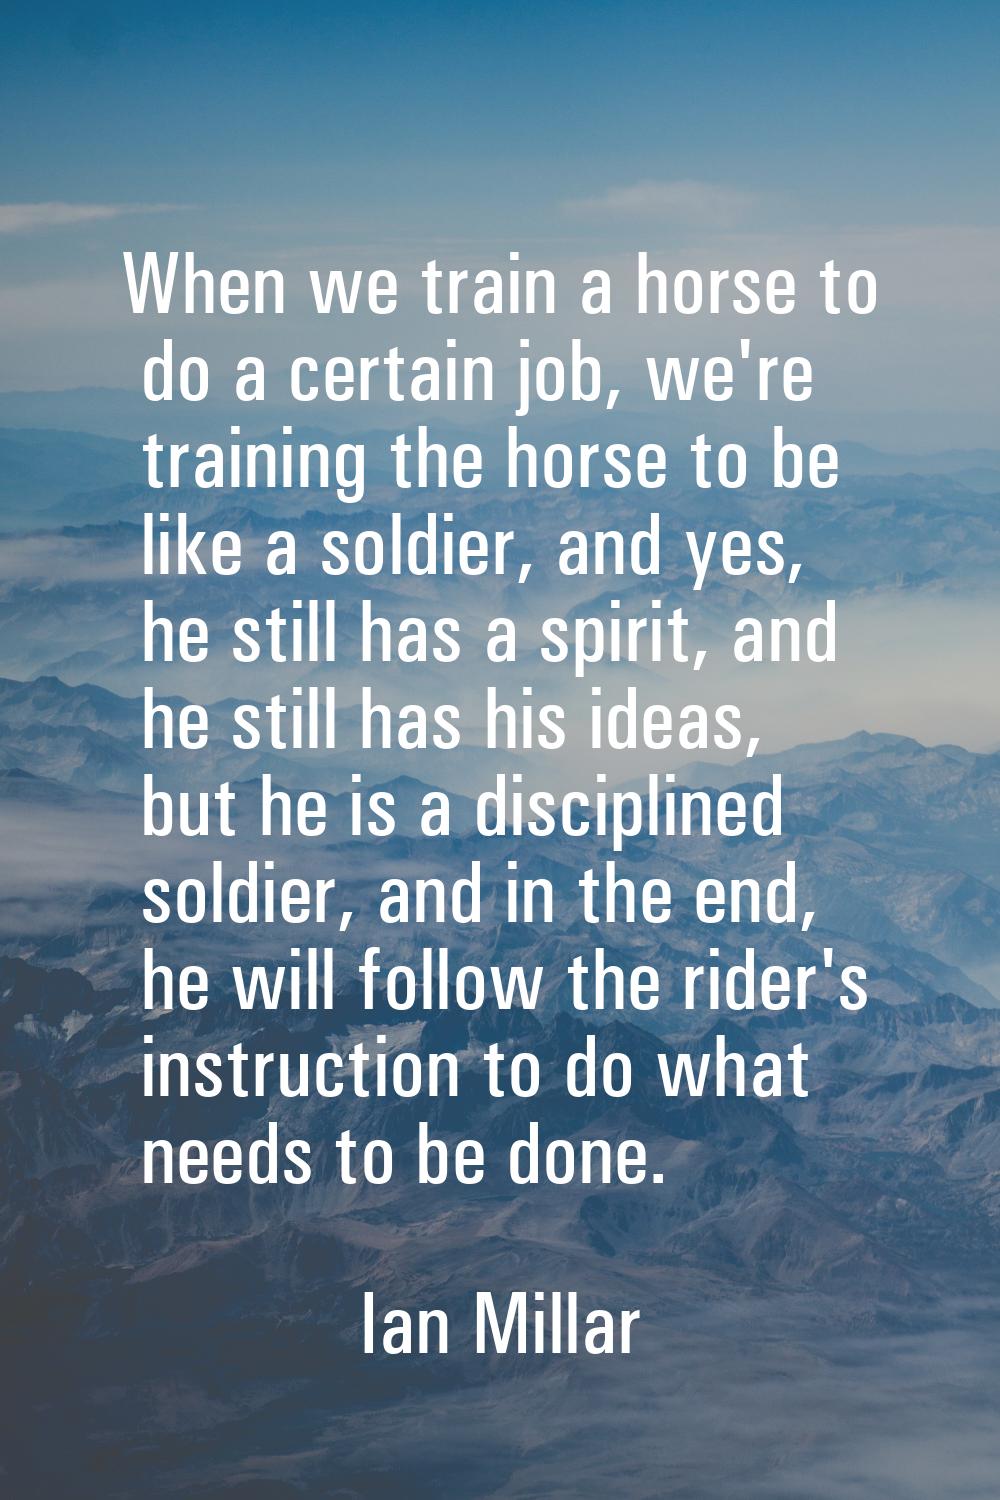 When we train a horse to do a certain job, we're training the horse to be like a soldier, and yes, 